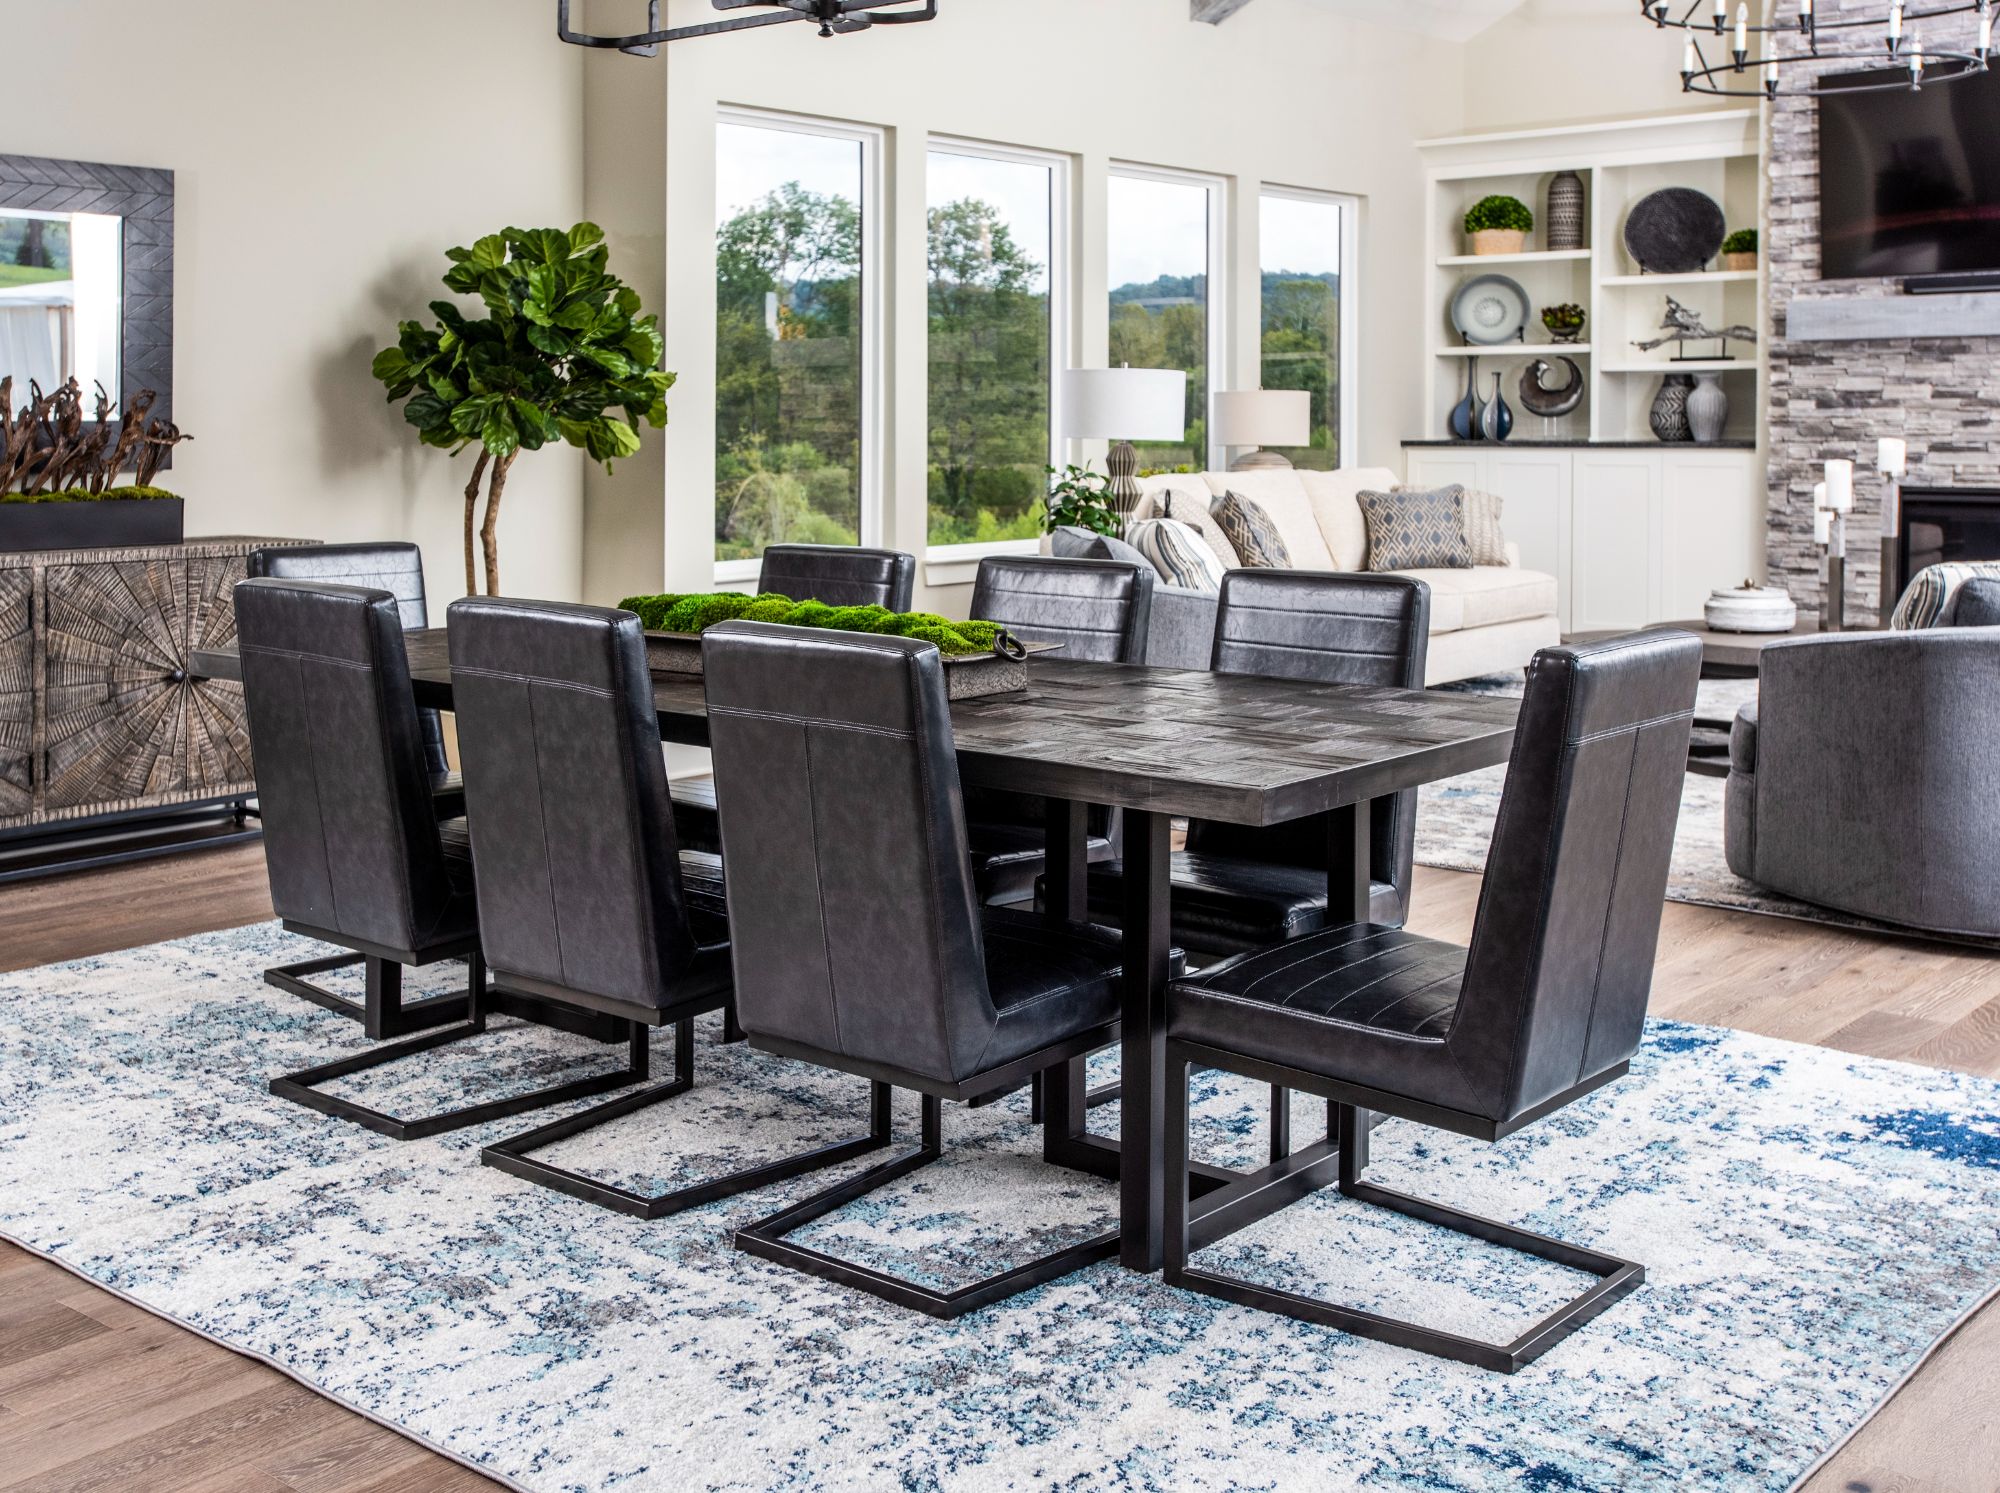 How To Encourage More Traffic In Your Dining Room